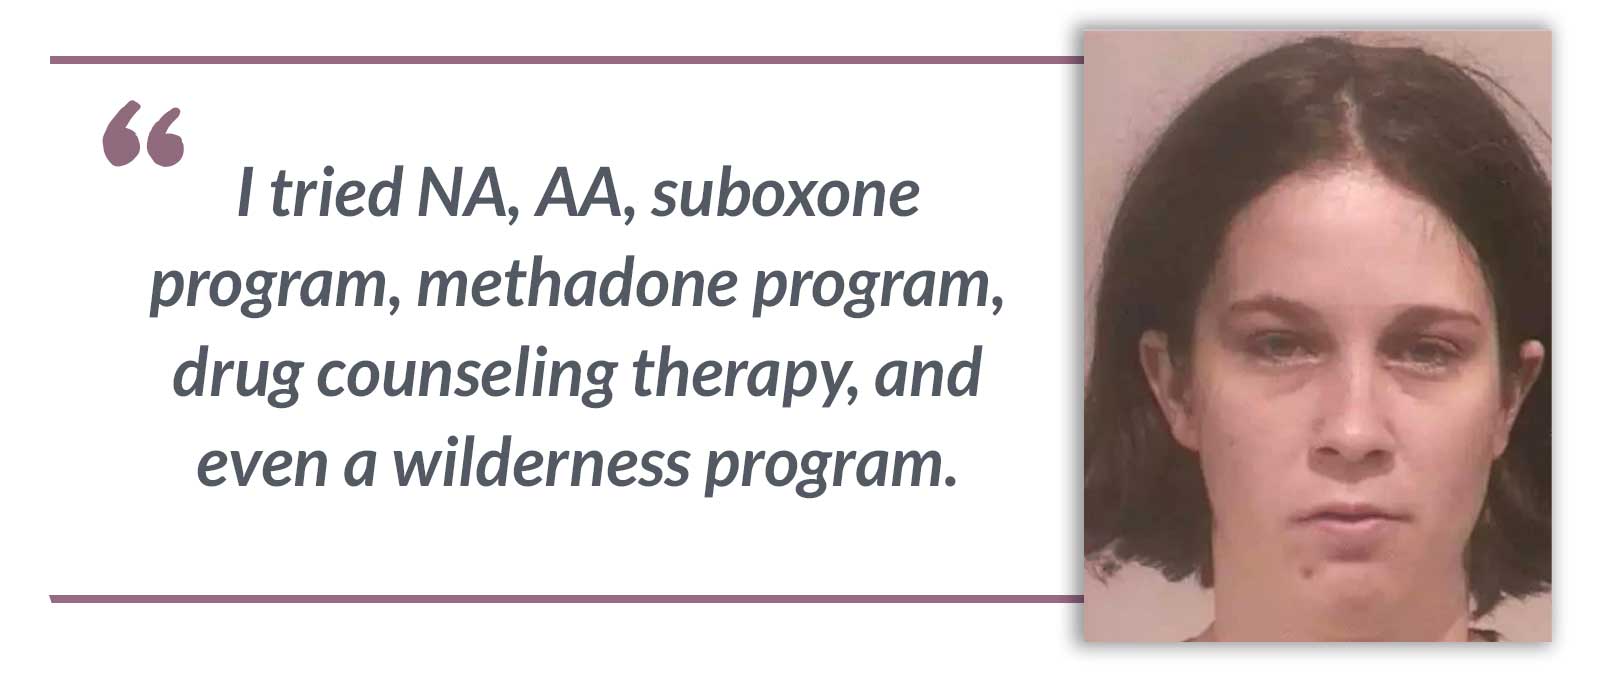 I tried NA, AA, suboxone program, methadone program, drug counseling therapy, and even a wilderness program.-Emily